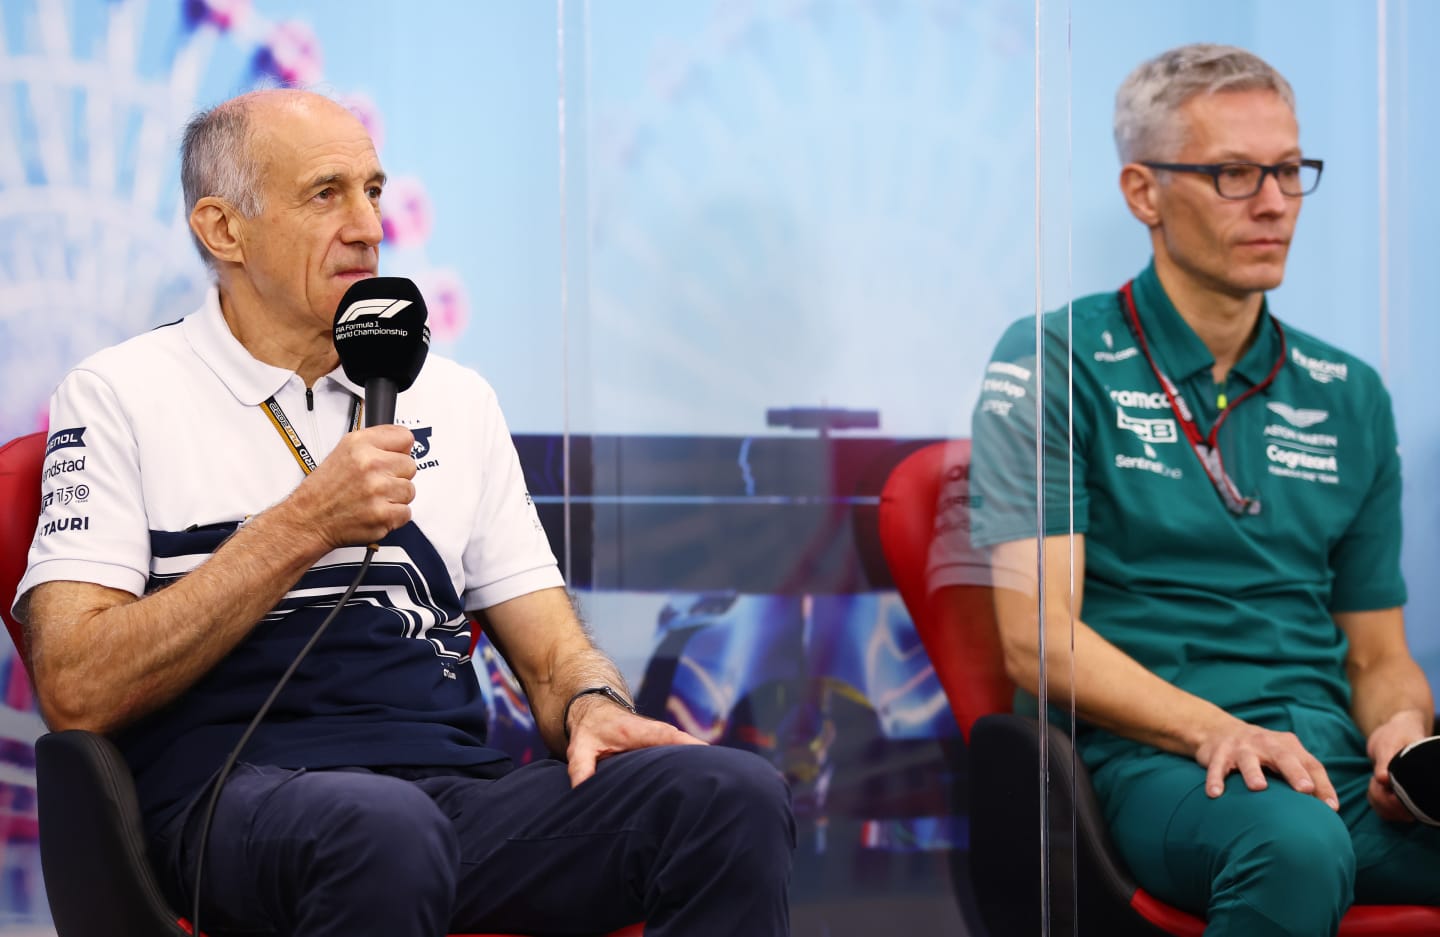 SUZUKA, JAPAN - OCTOBER 08: Scuderia AlphaTauri Team Principal Franz Tost and Mike Krack, Team Principal of the Aston Martin F1 Team attend the Team Principals Press Conference prior to final practice ahead of the F1 Grand Prix of Japan at Suzuka International Racing Course on October 08, 2022 in Suzuka, Japan. (Photo by Bryn Lennon/Getty Images)